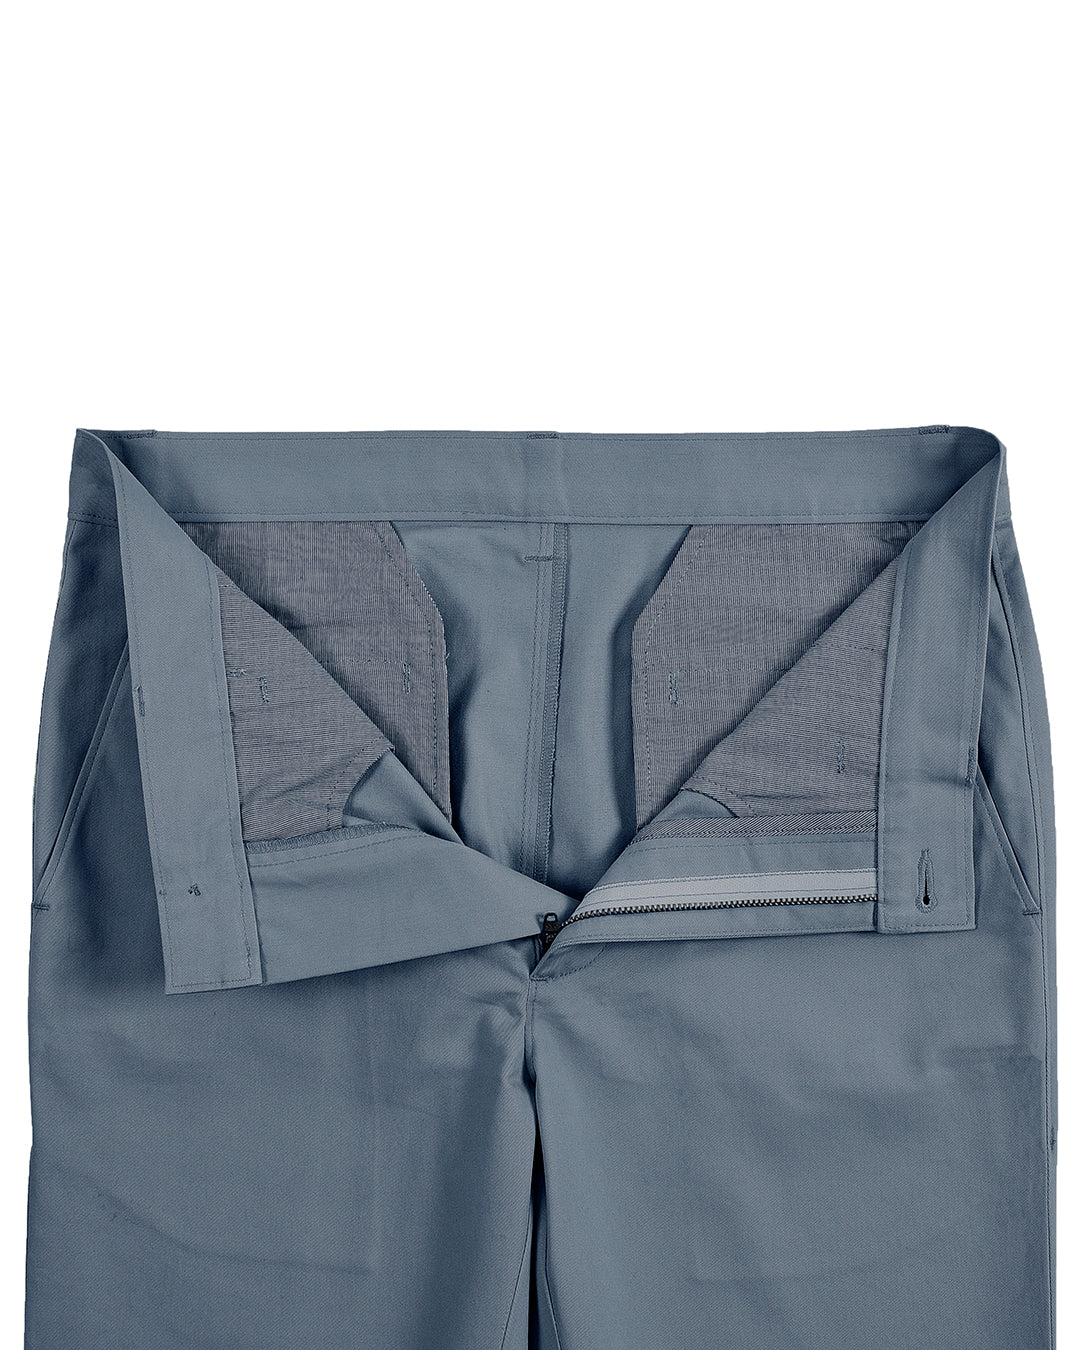 Open front view of custom Genoa Chino pants for men by Luxire in blueish grey